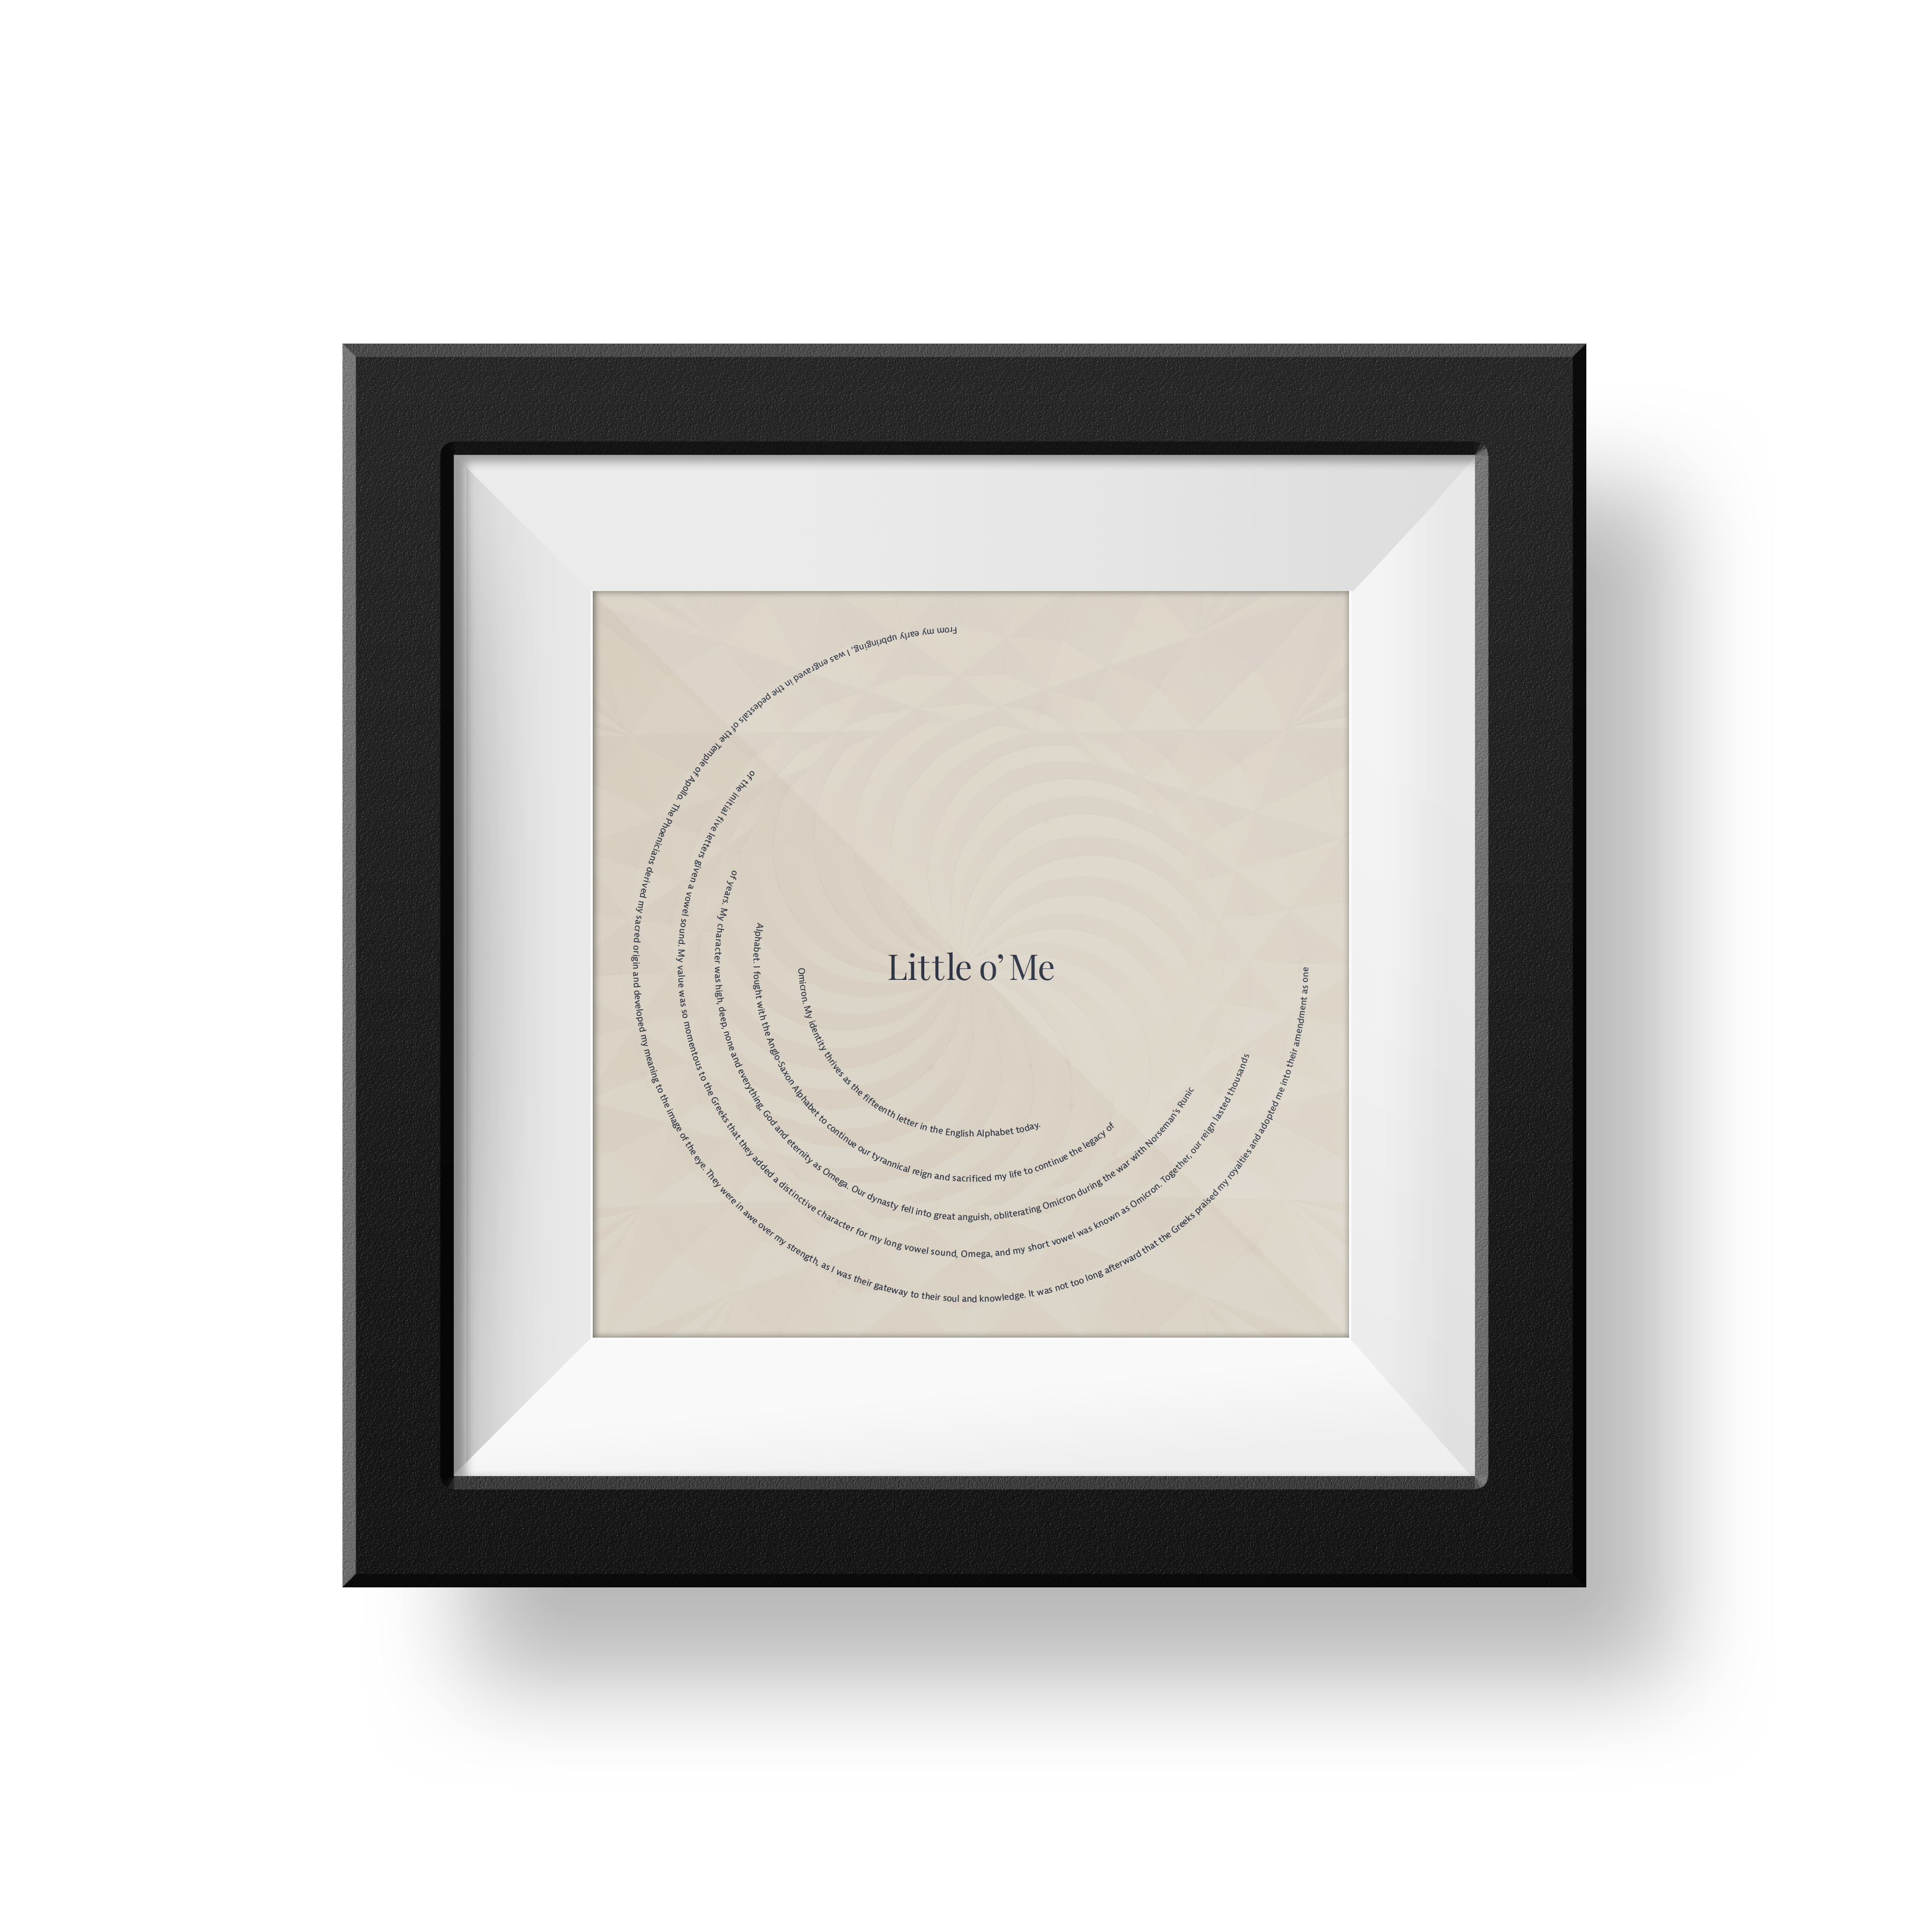 Framed artwork representing symbol of the letter o's history, curving into the shape of the letter